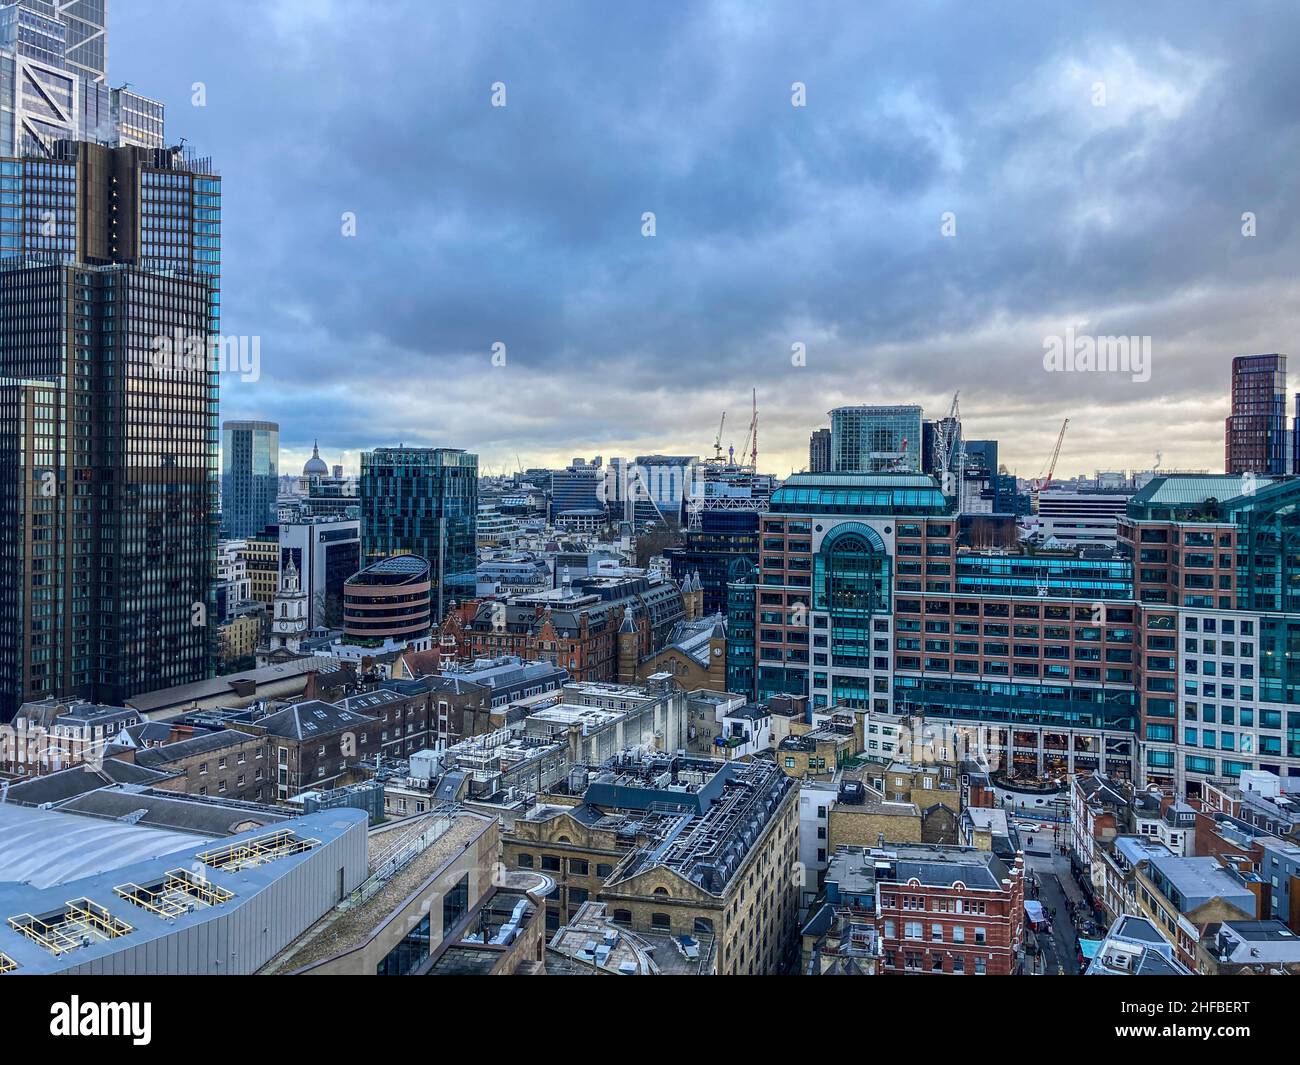 London, England, semi-aerial view from a tower block in Spitalfields, overlooking Middlesex Street with market stalls, and city offices Stock Photo